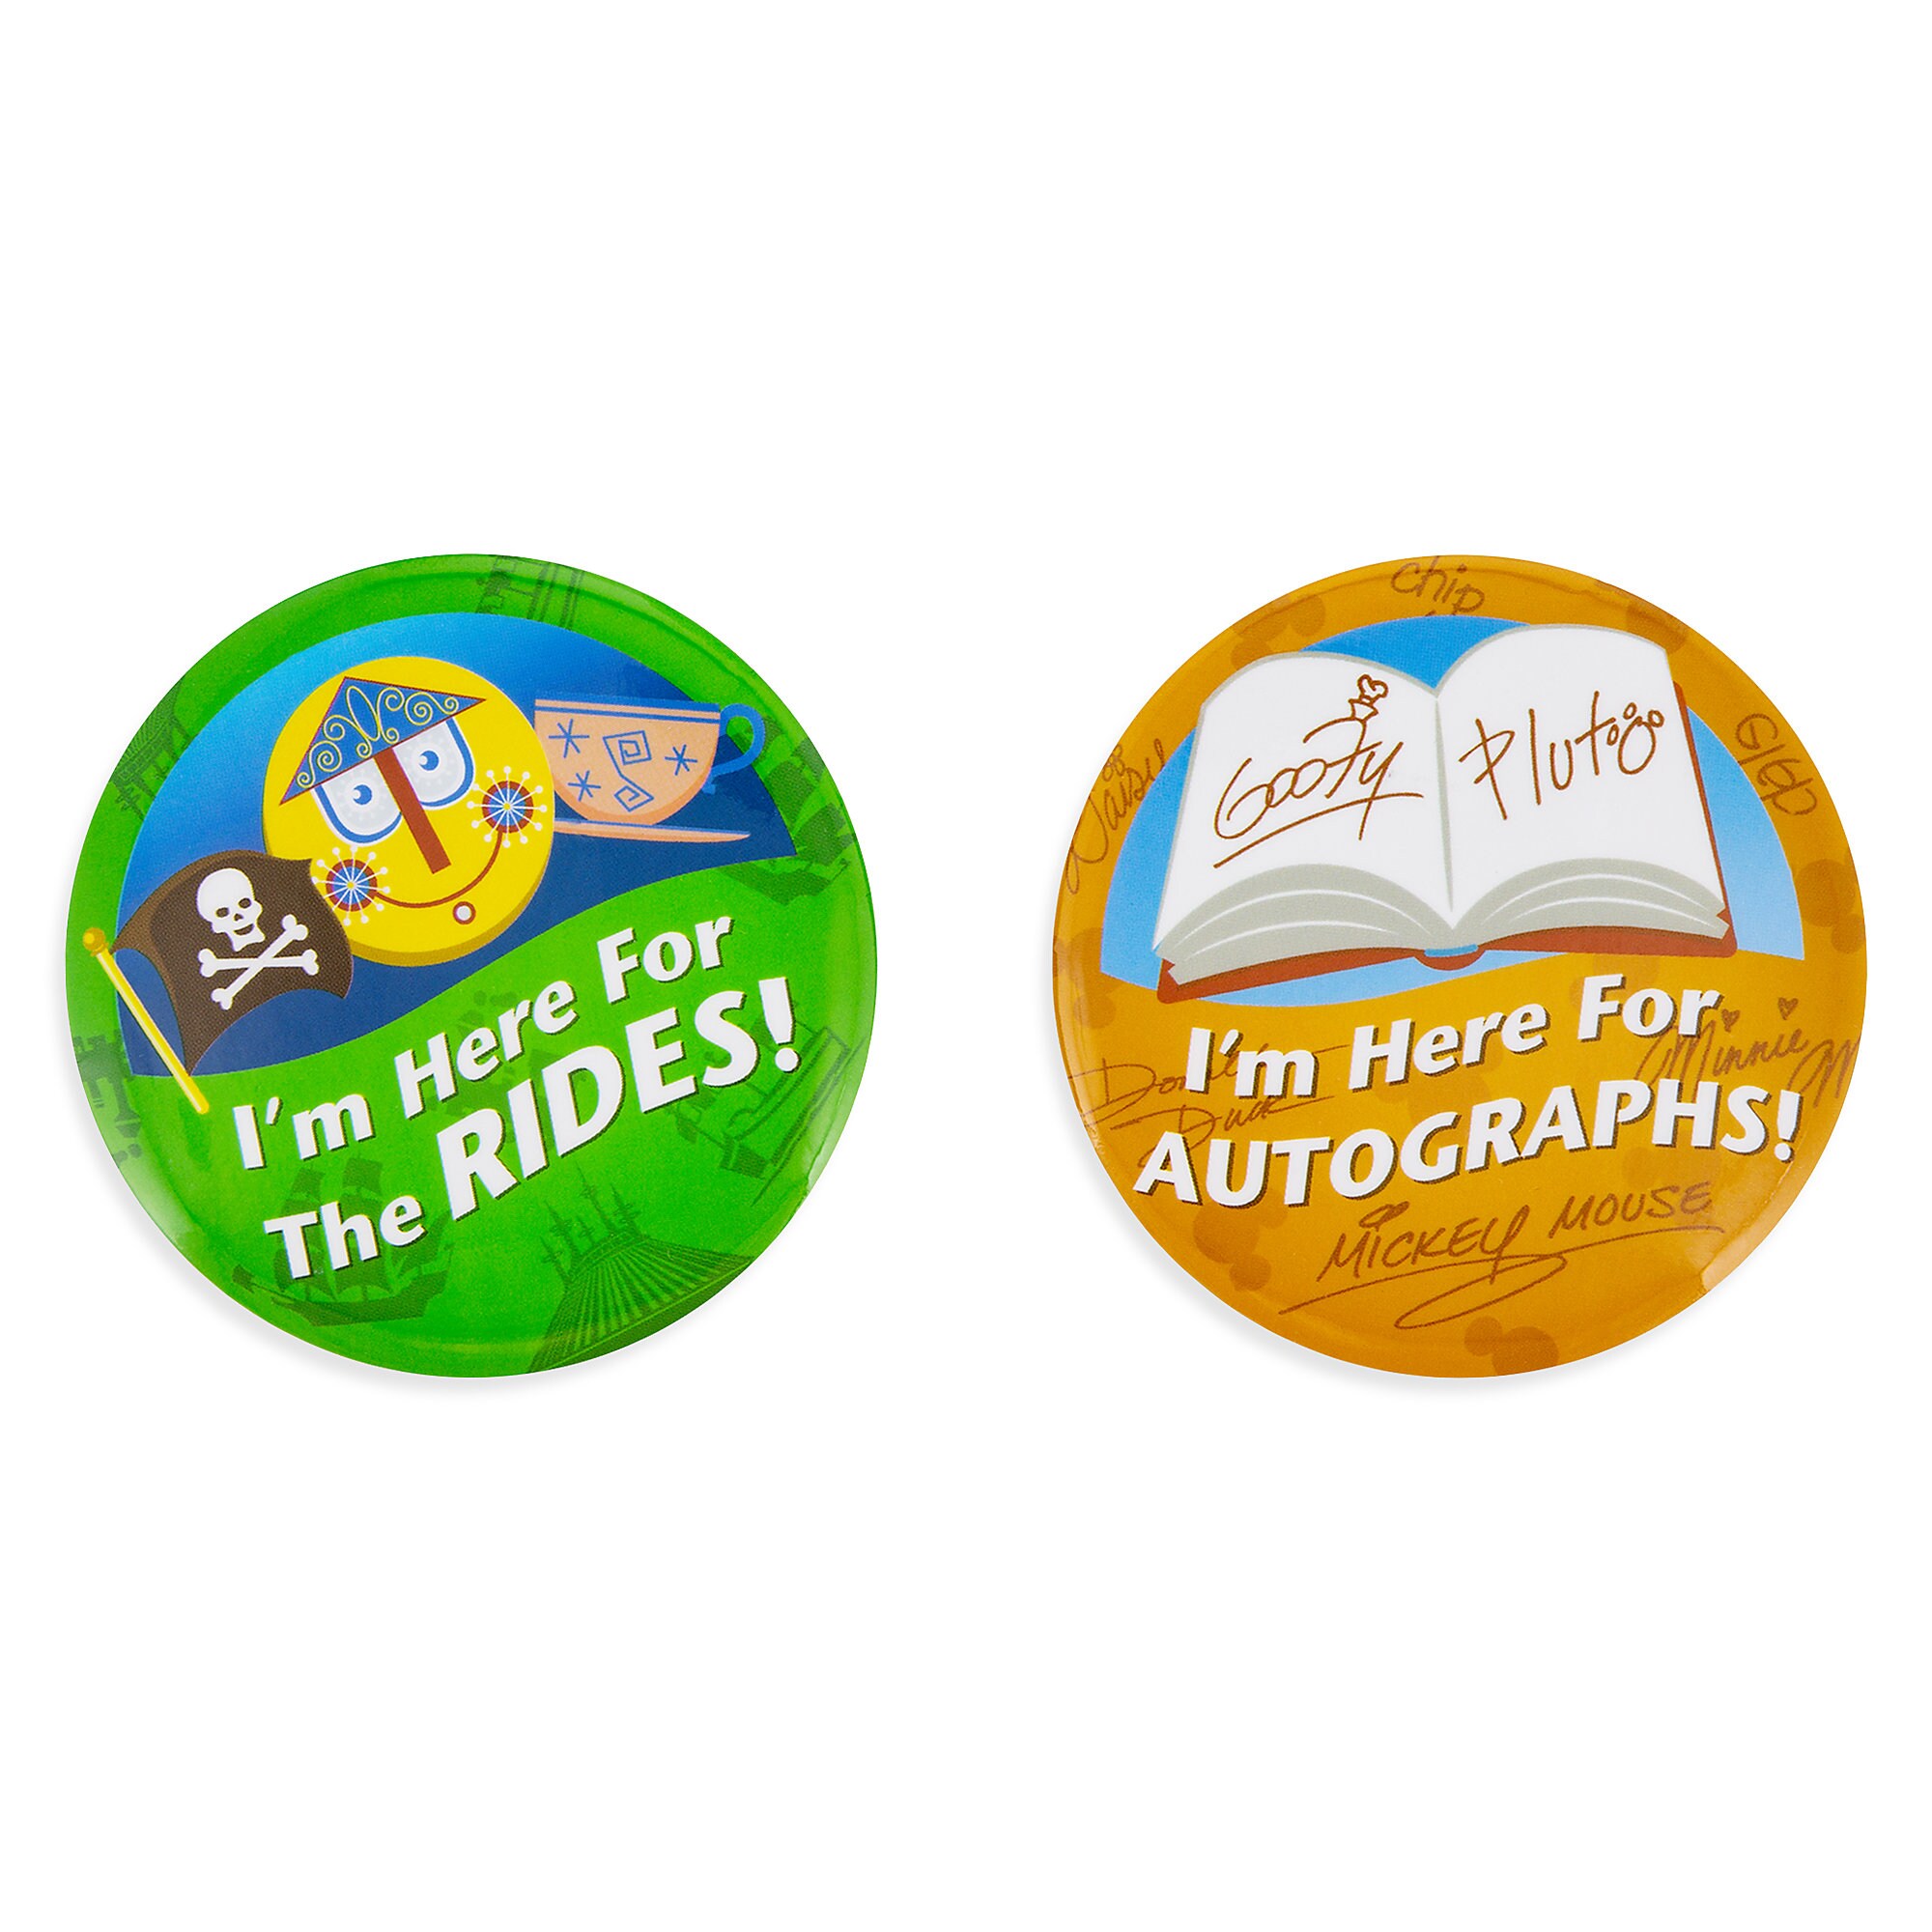 Disney Parks ''I'm Here for ... Rides'' Button Set